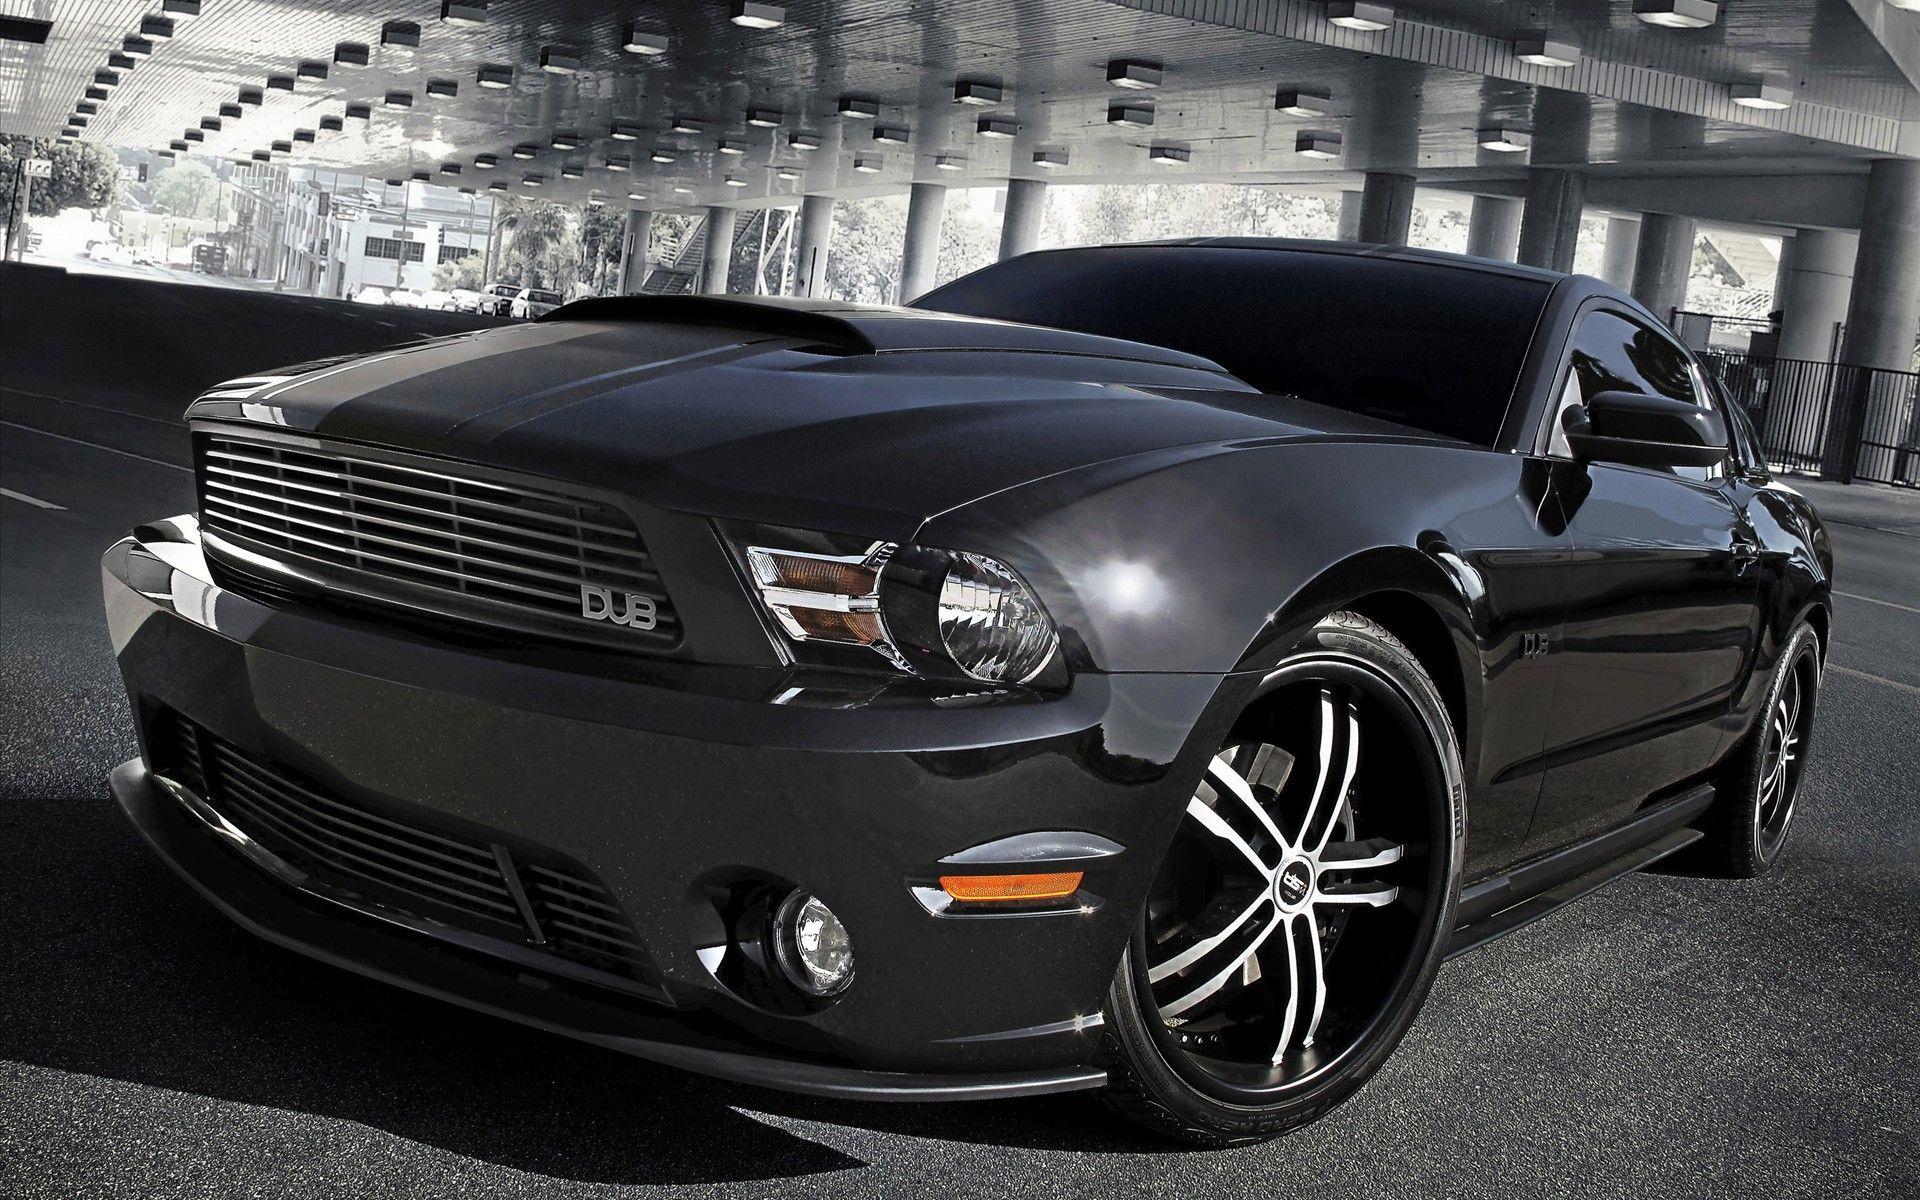 Hd Wallpapers Of Mustang Cars